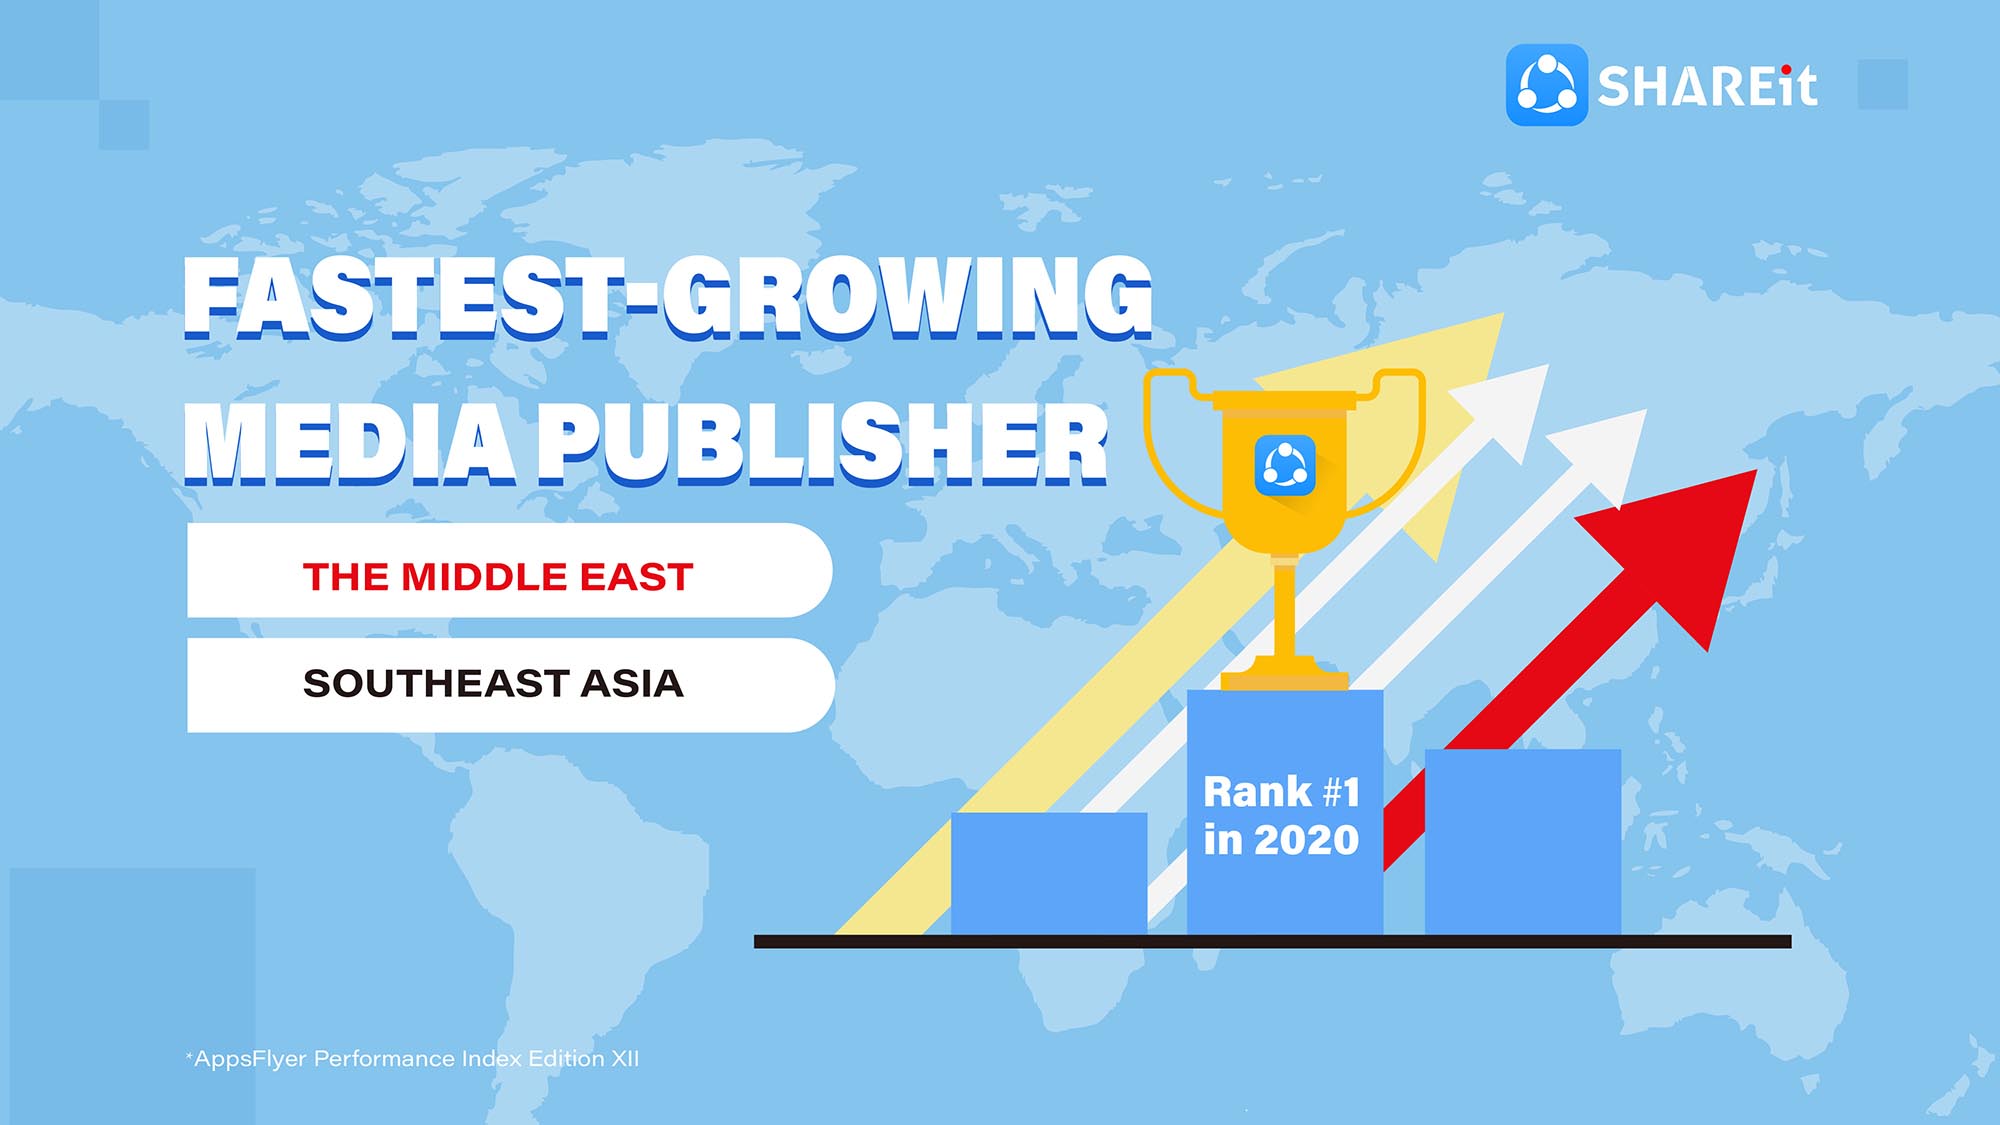 SHAREit tops and amongst the fastest-growing media publishers in Southeast Asia and the Middle East in H2 2020 